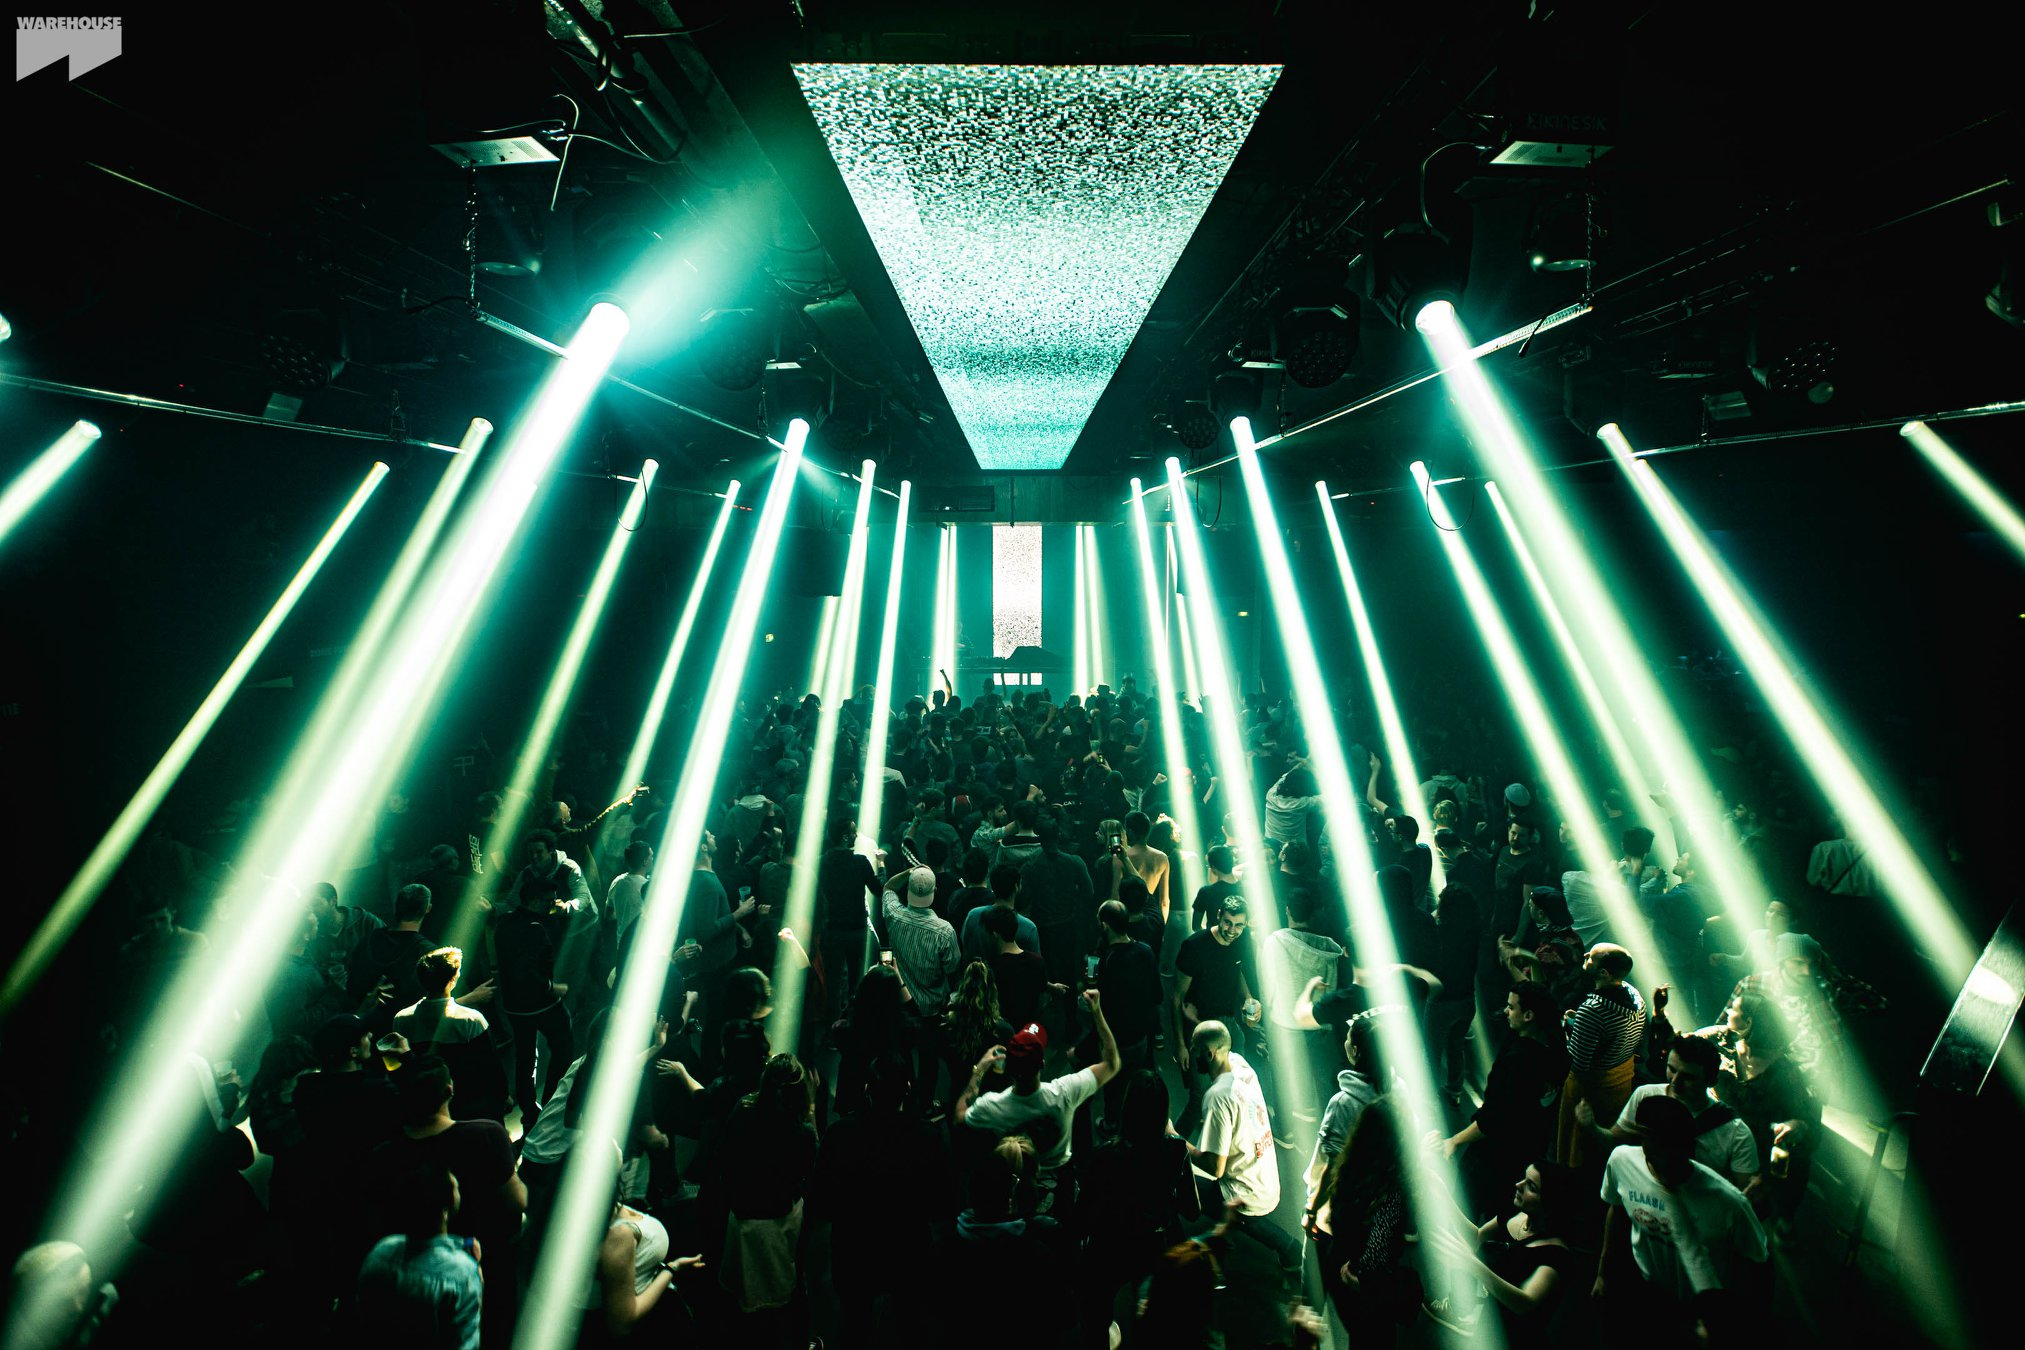 20 The Best Best Night Clubs In The World 2022